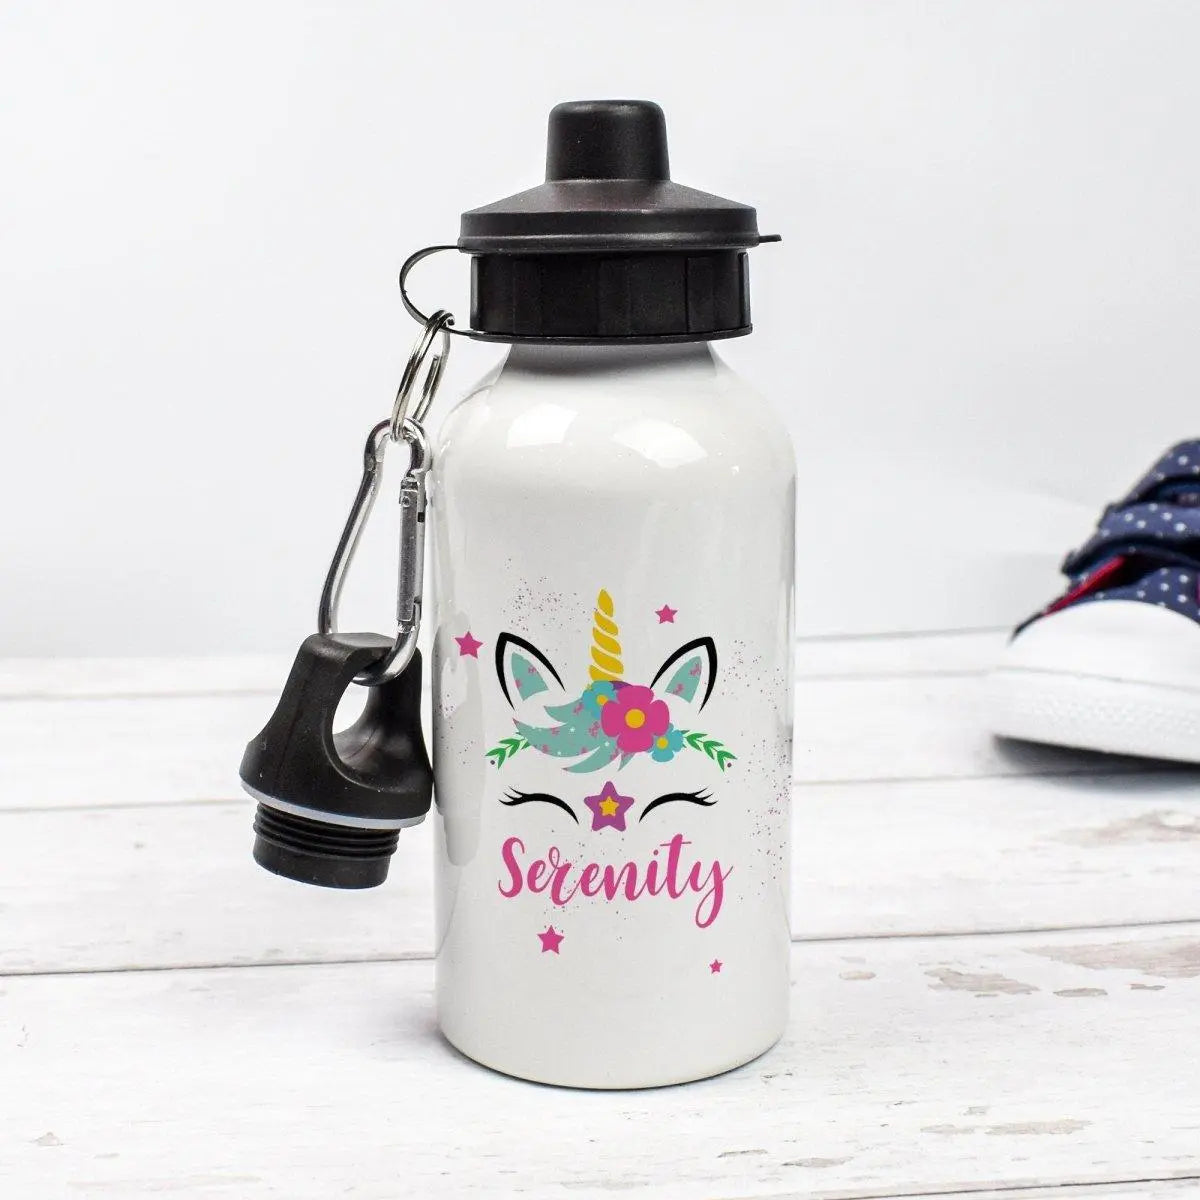 Personalised Unicorn Water Bottle, Unicorn School Bottle, Kids Unicorn Drink Bottle, Girls School Flask, Kids Children Student Drinks Cup, - Amy Lucy